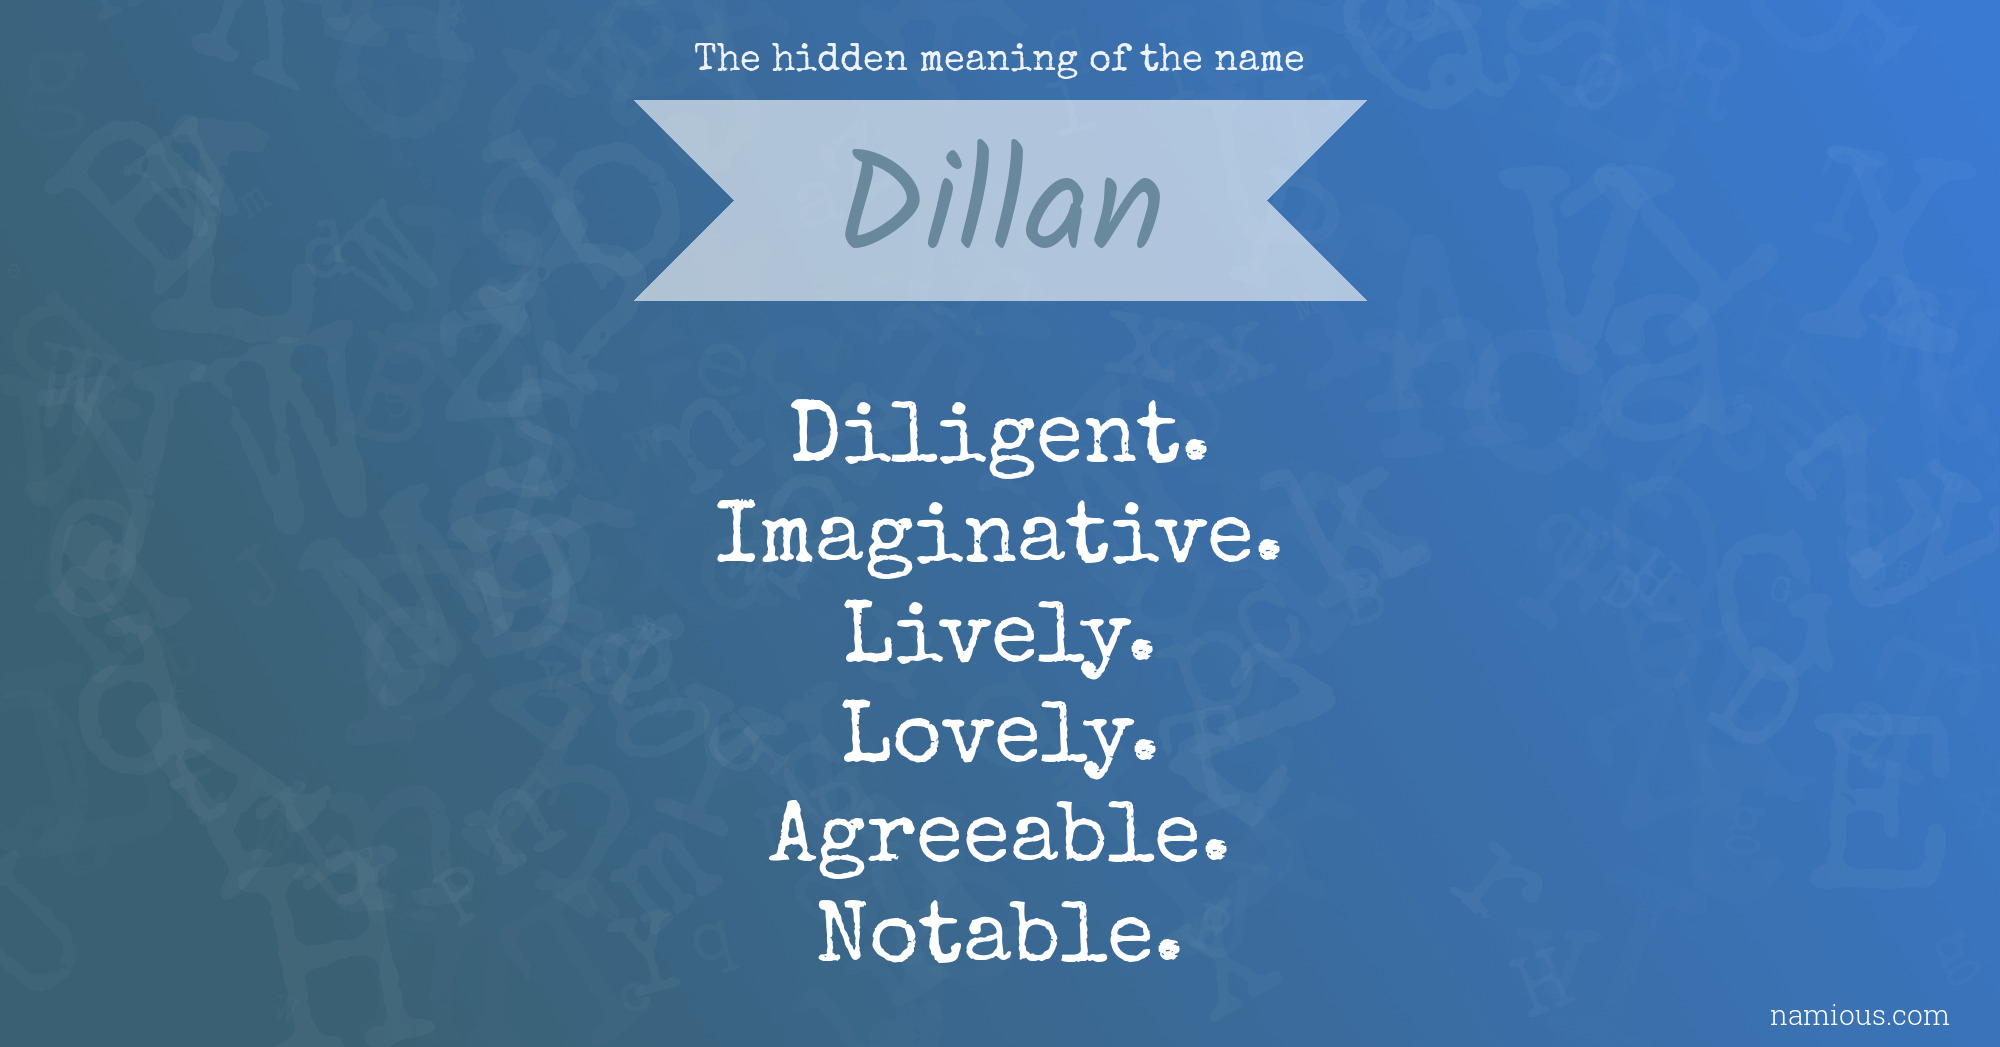 The hidden meaning of the name Dillan